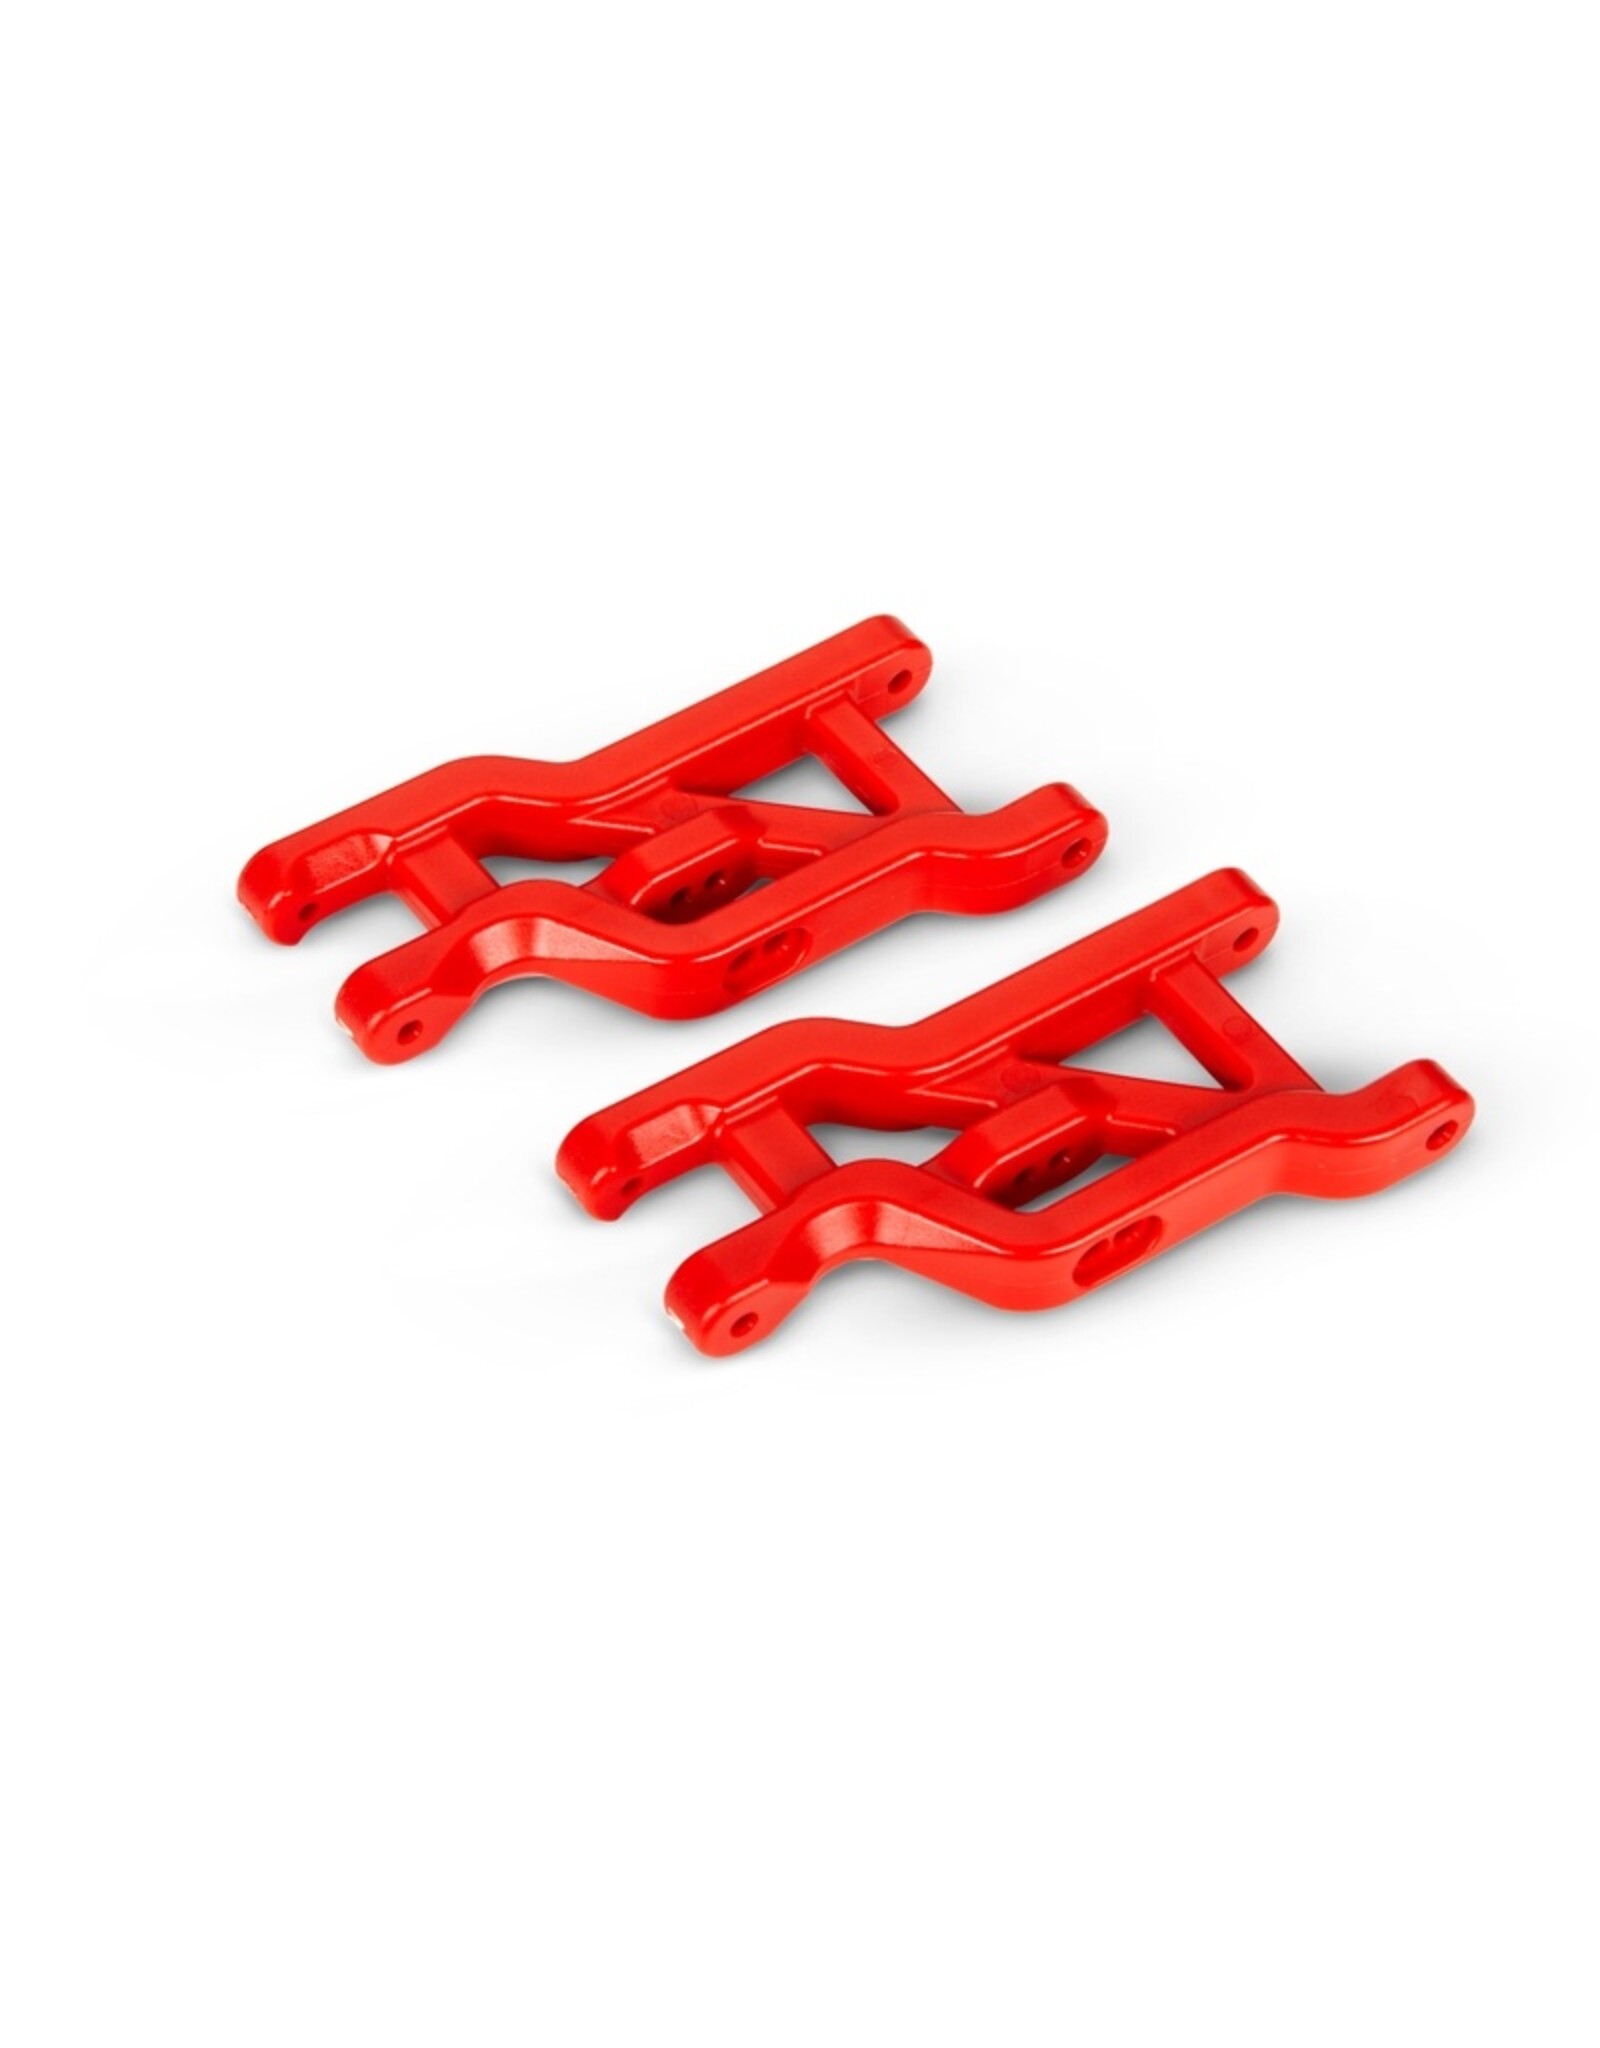 Traxxas TRA2531R Suspension arms, red, front, heavy duty (2) (requires #3632 series caster block and #3640 screw pin set)